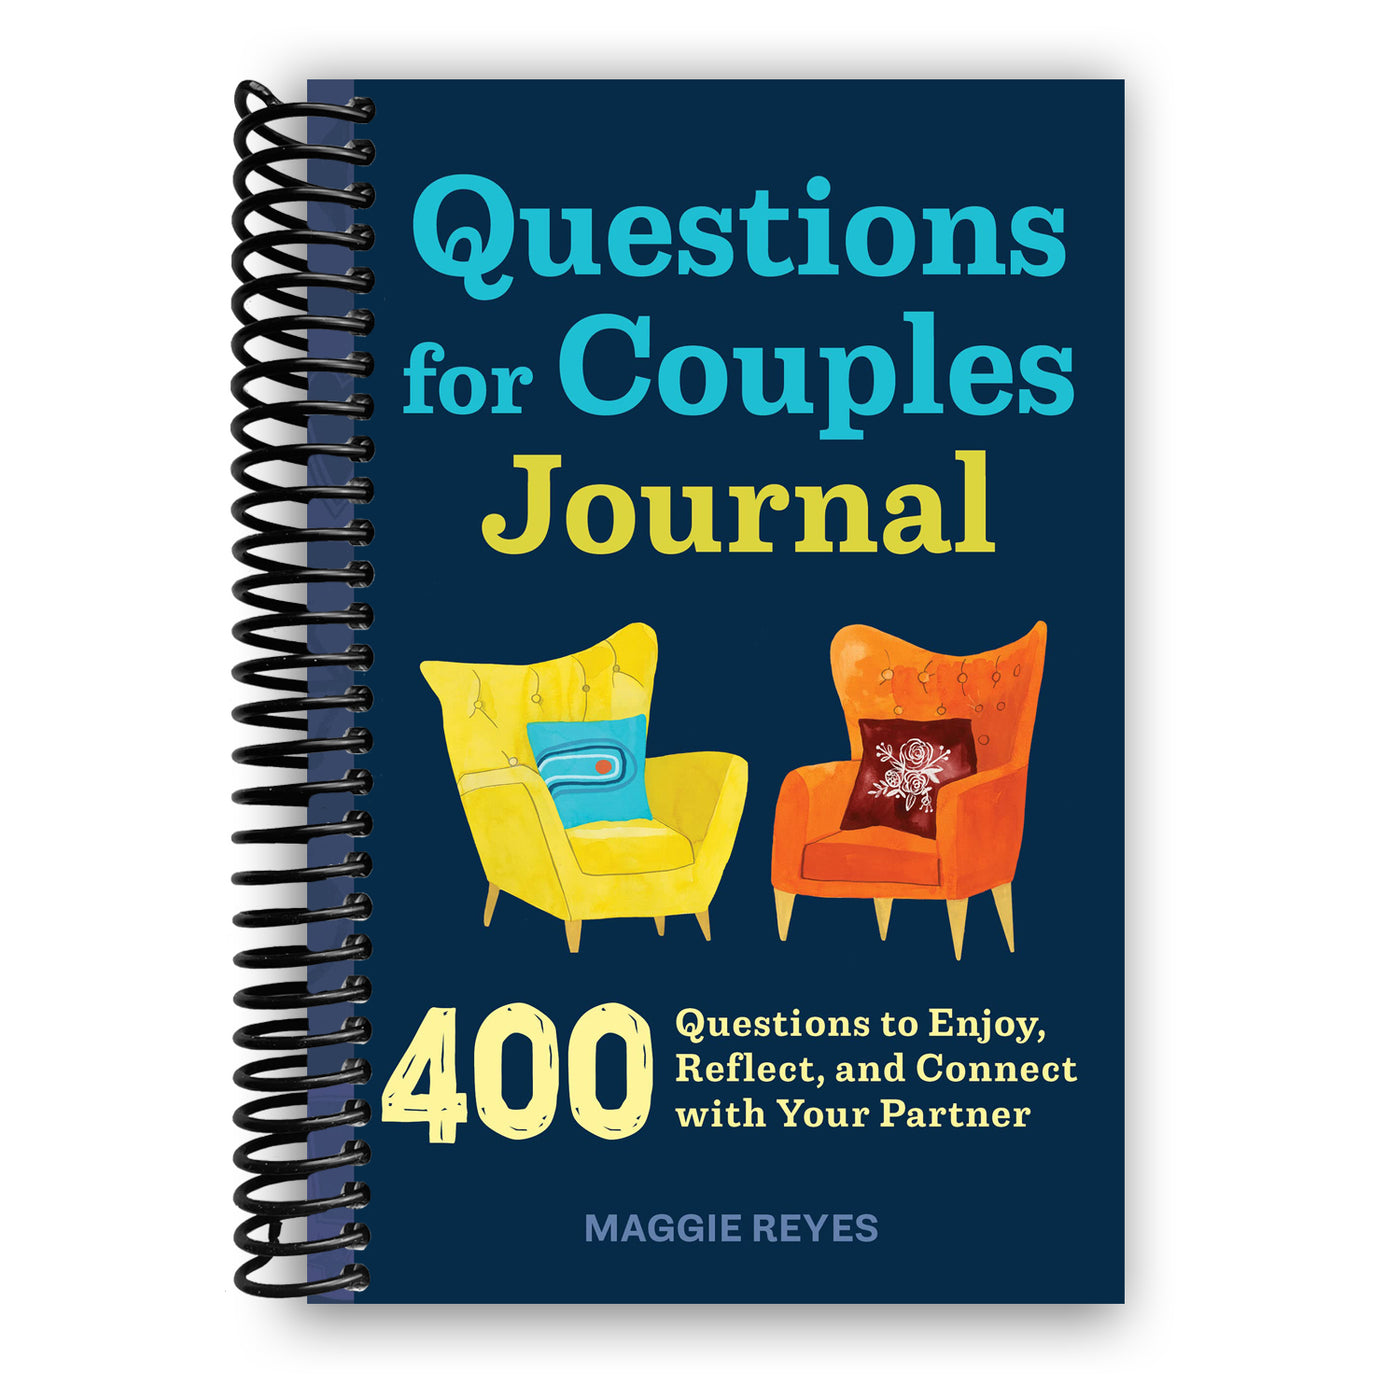 Questions for Couples Journal: 400 Questions to Enjoy, Reflect, and Connect with Your Partner (Spiral Bound)